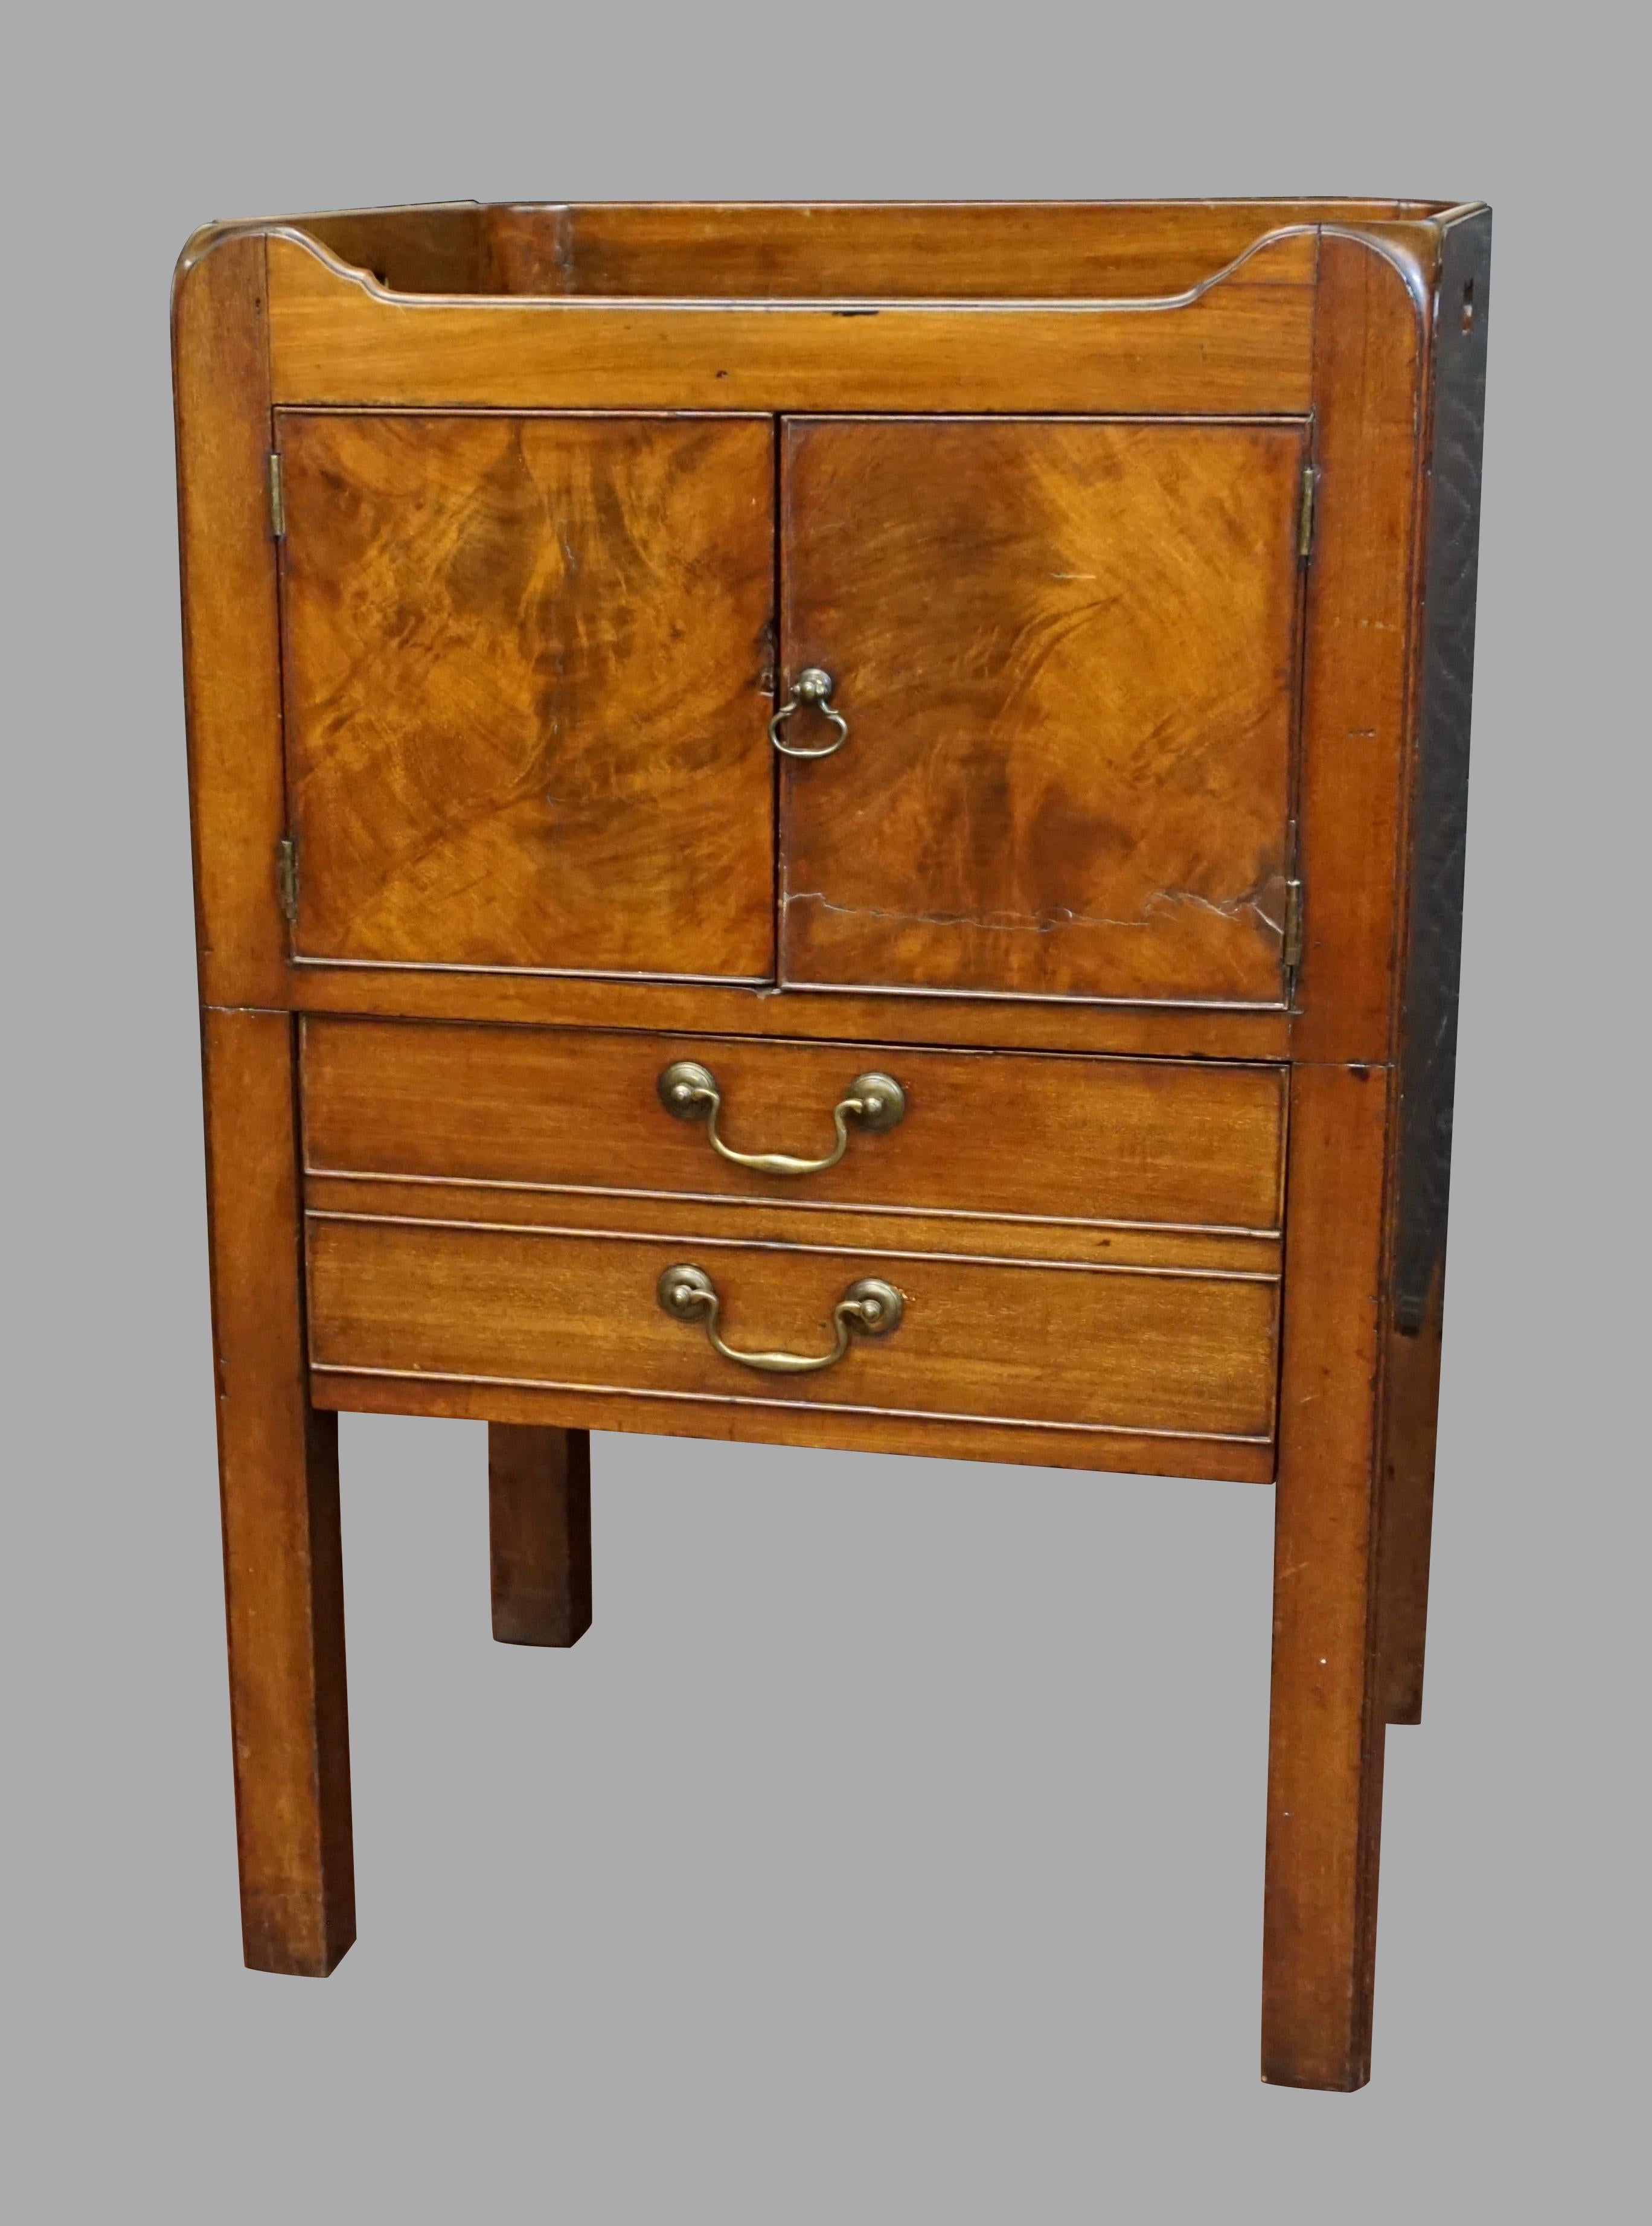 A George III figured mahogany bedside commode of typical form, the shaped top with side carrying handle cutouts, above a pair of cupboard doors over a single pull out drawer all resting on square legs. Circa 1800-1820.